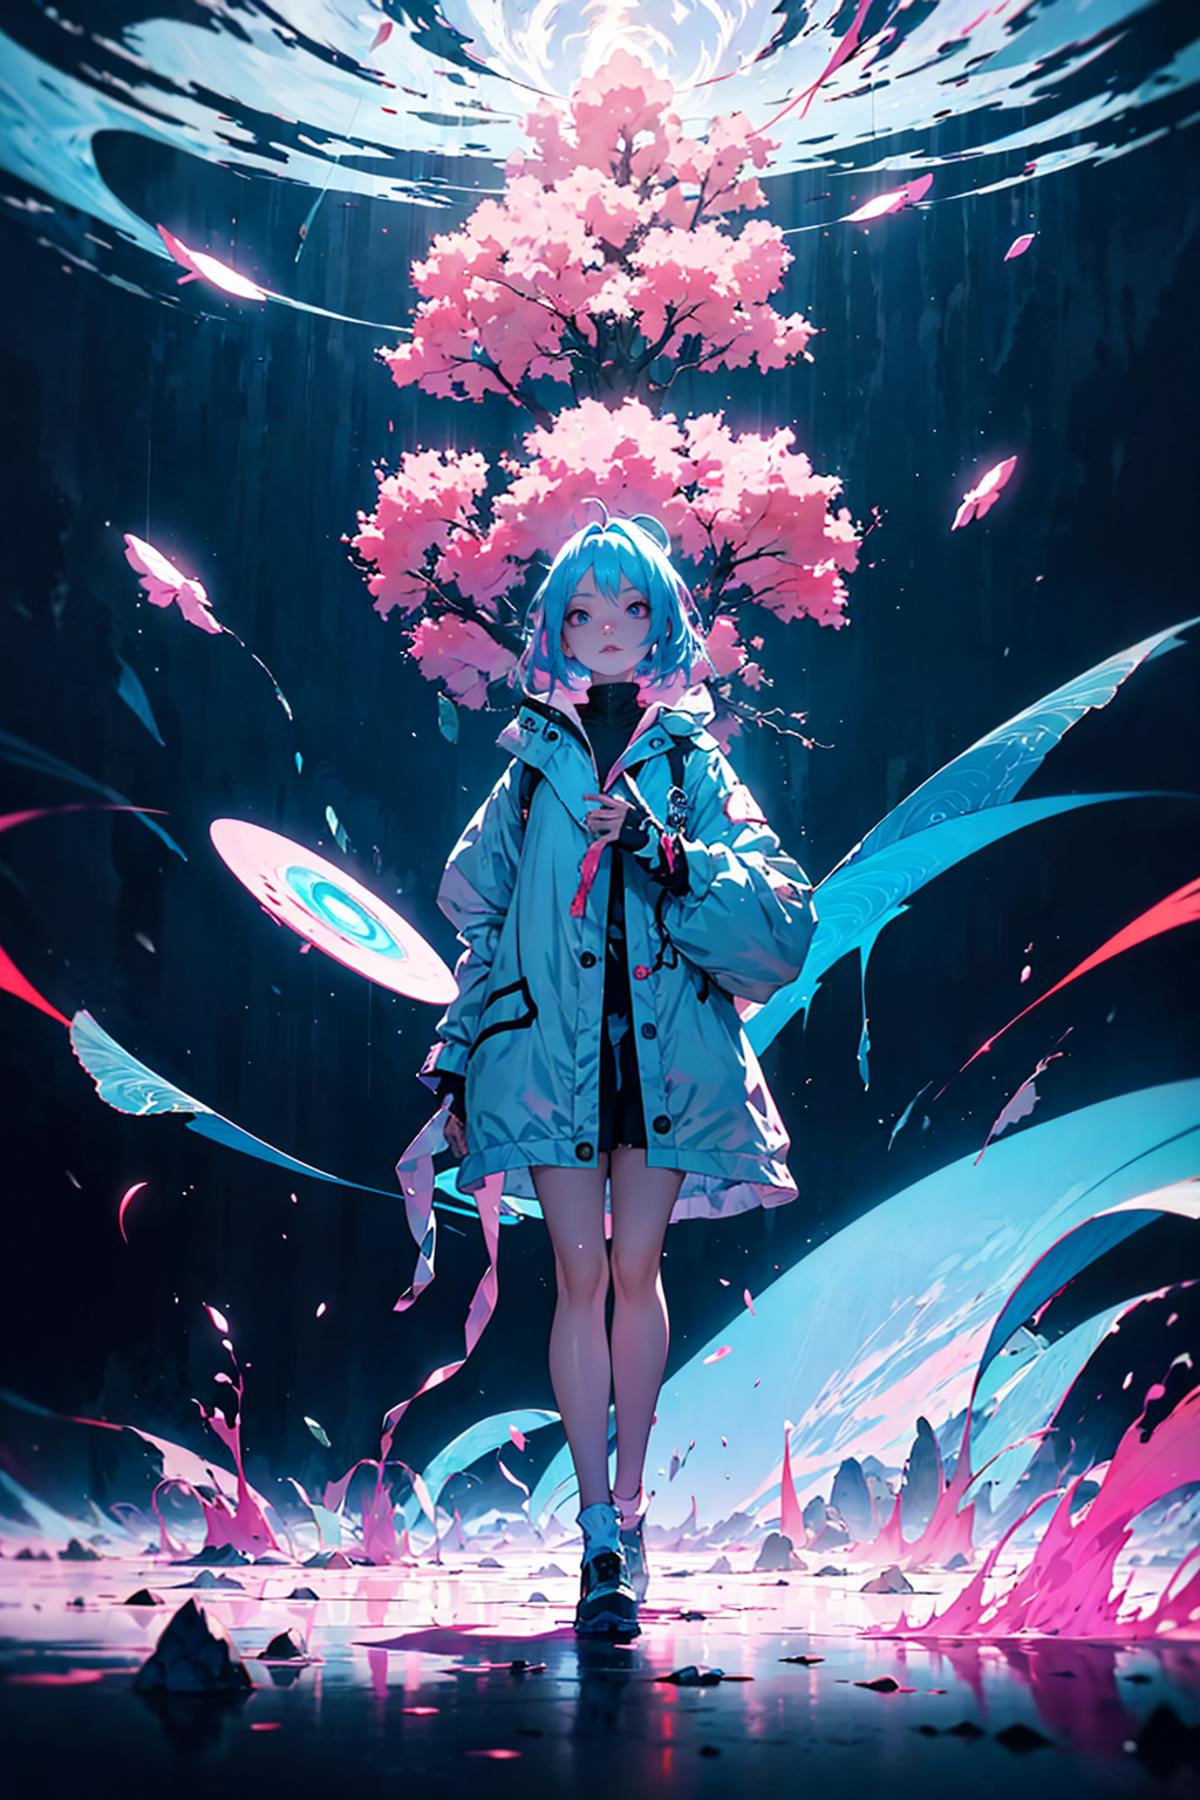 Anime-Inspired Artwork Featuring a Teenage Girl with Pink Hair and a Tree on Her Head